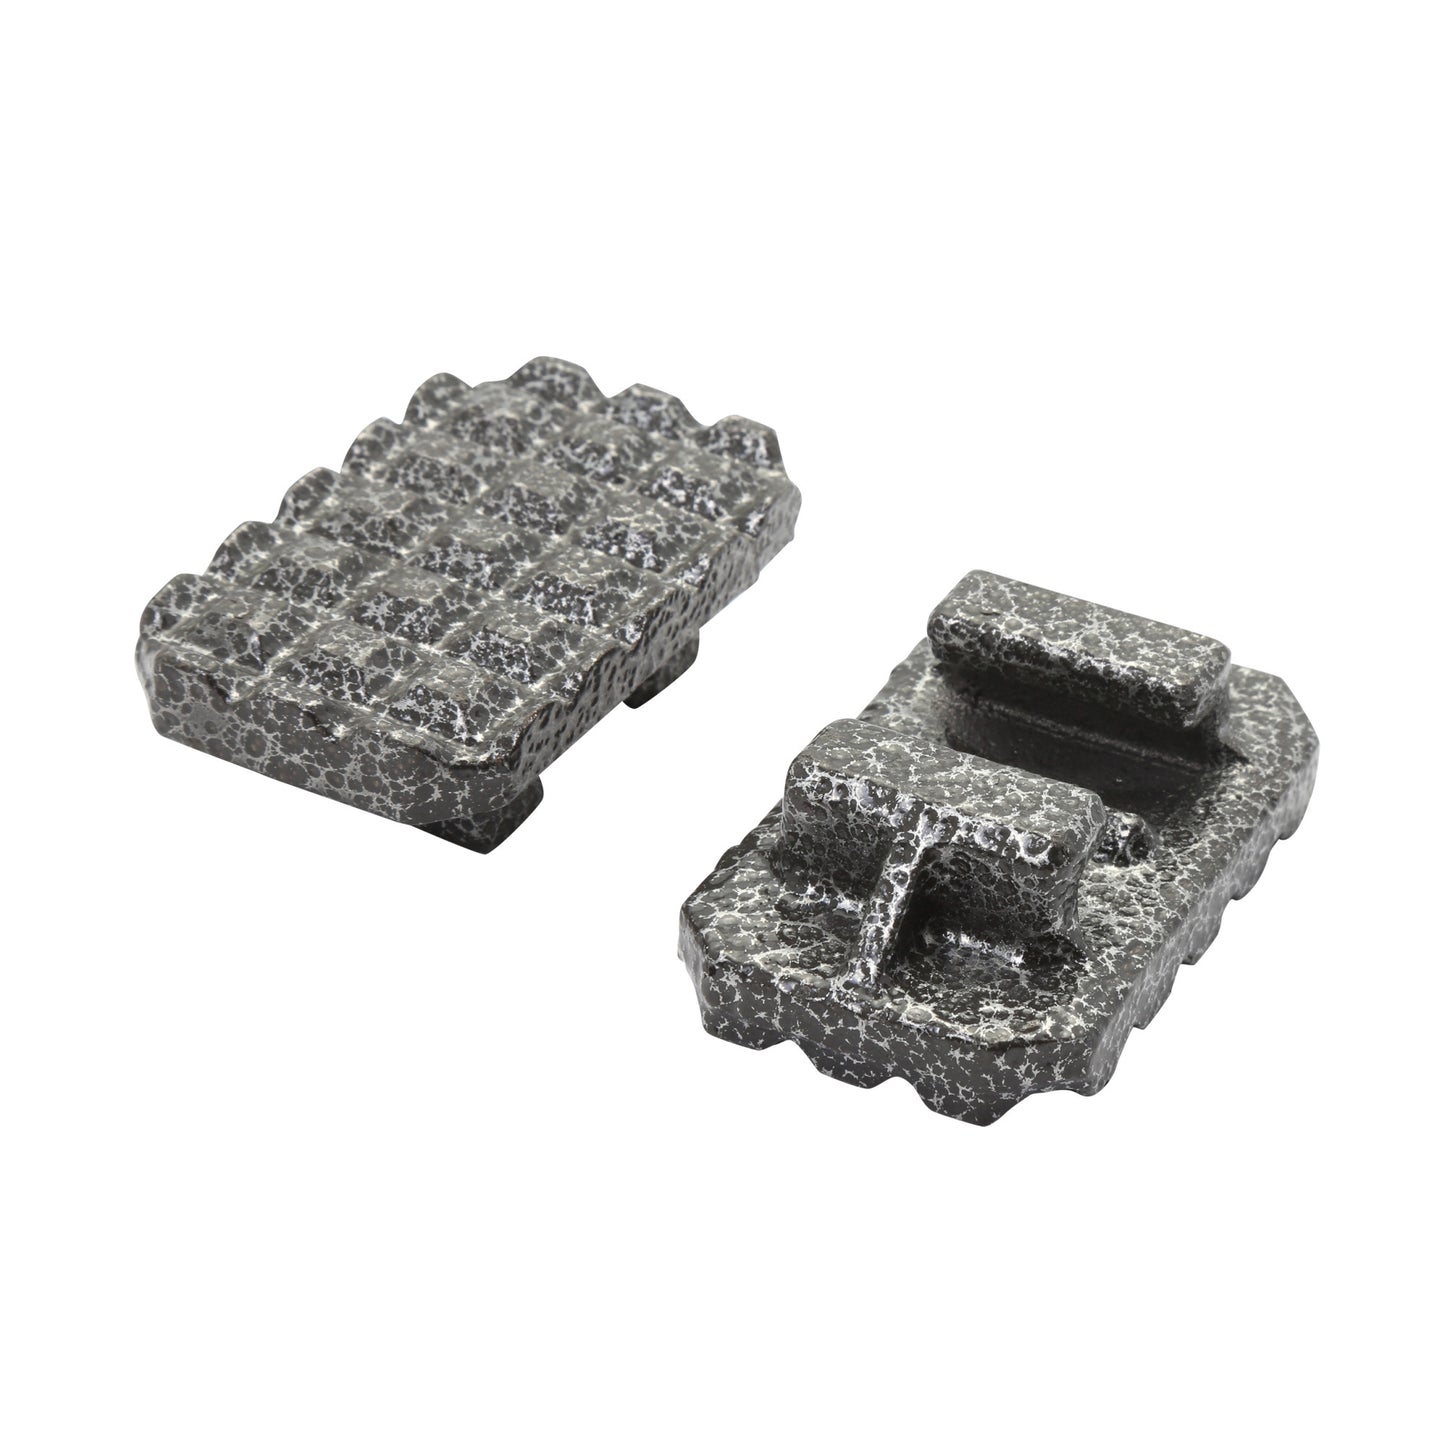 2-Piece Ductile Iron Hand Clamp Jaw Pads